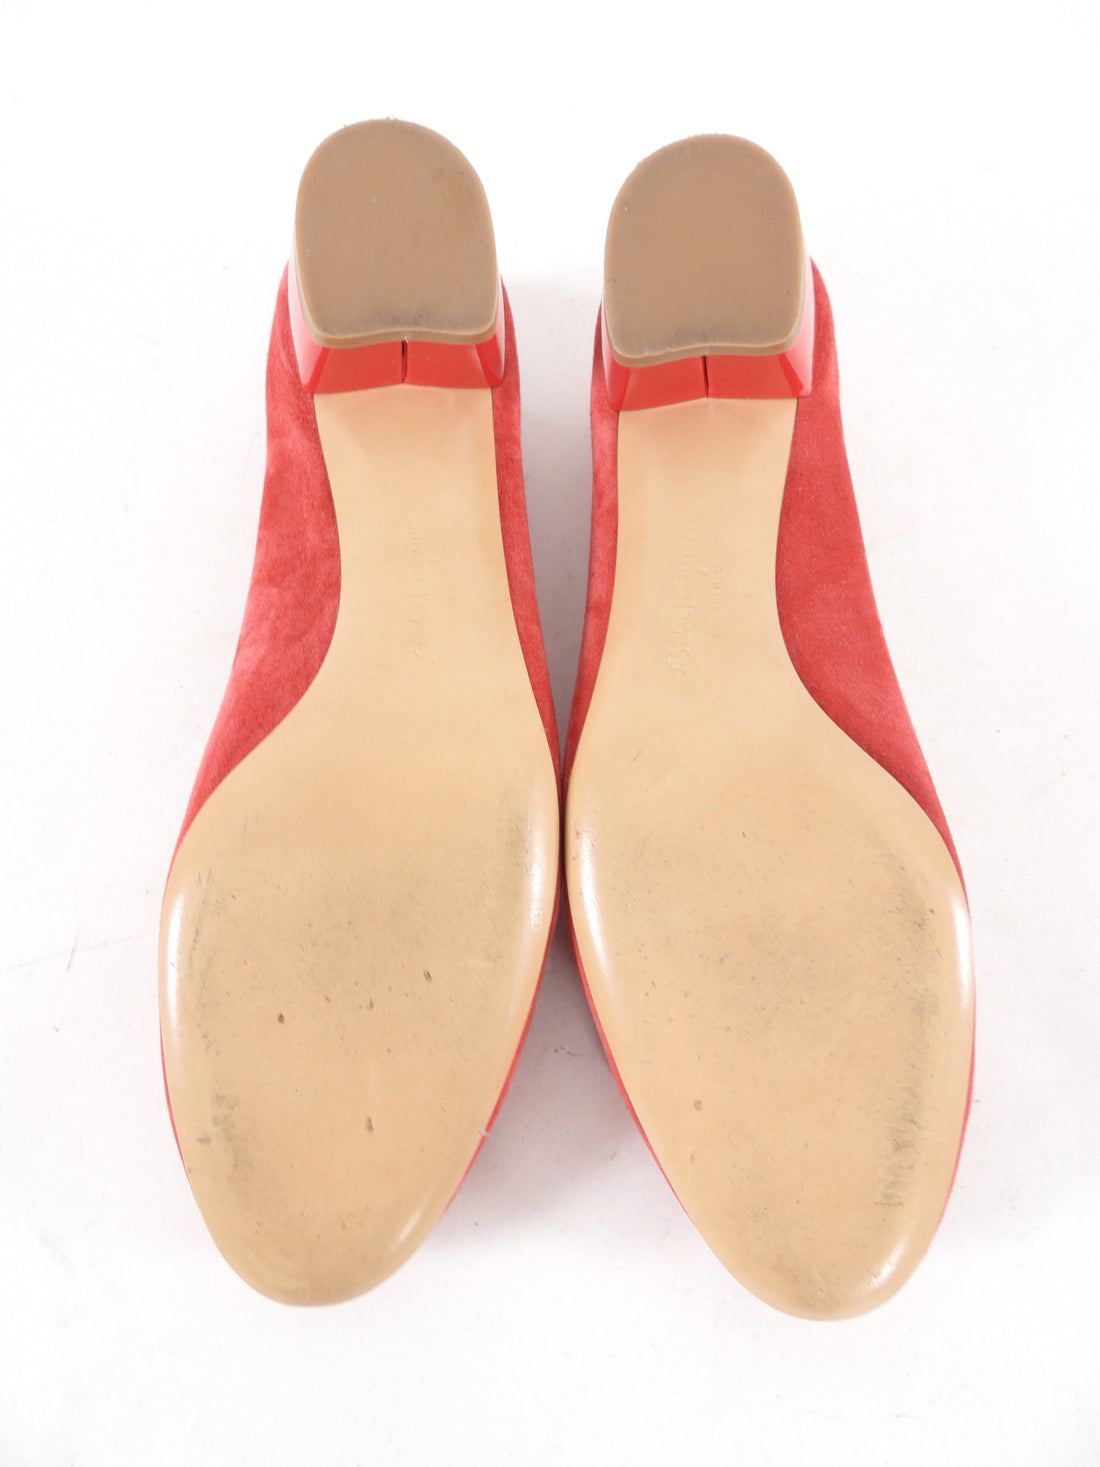 Ferragamo Red Suede Varina  Bow Shoes - 6B